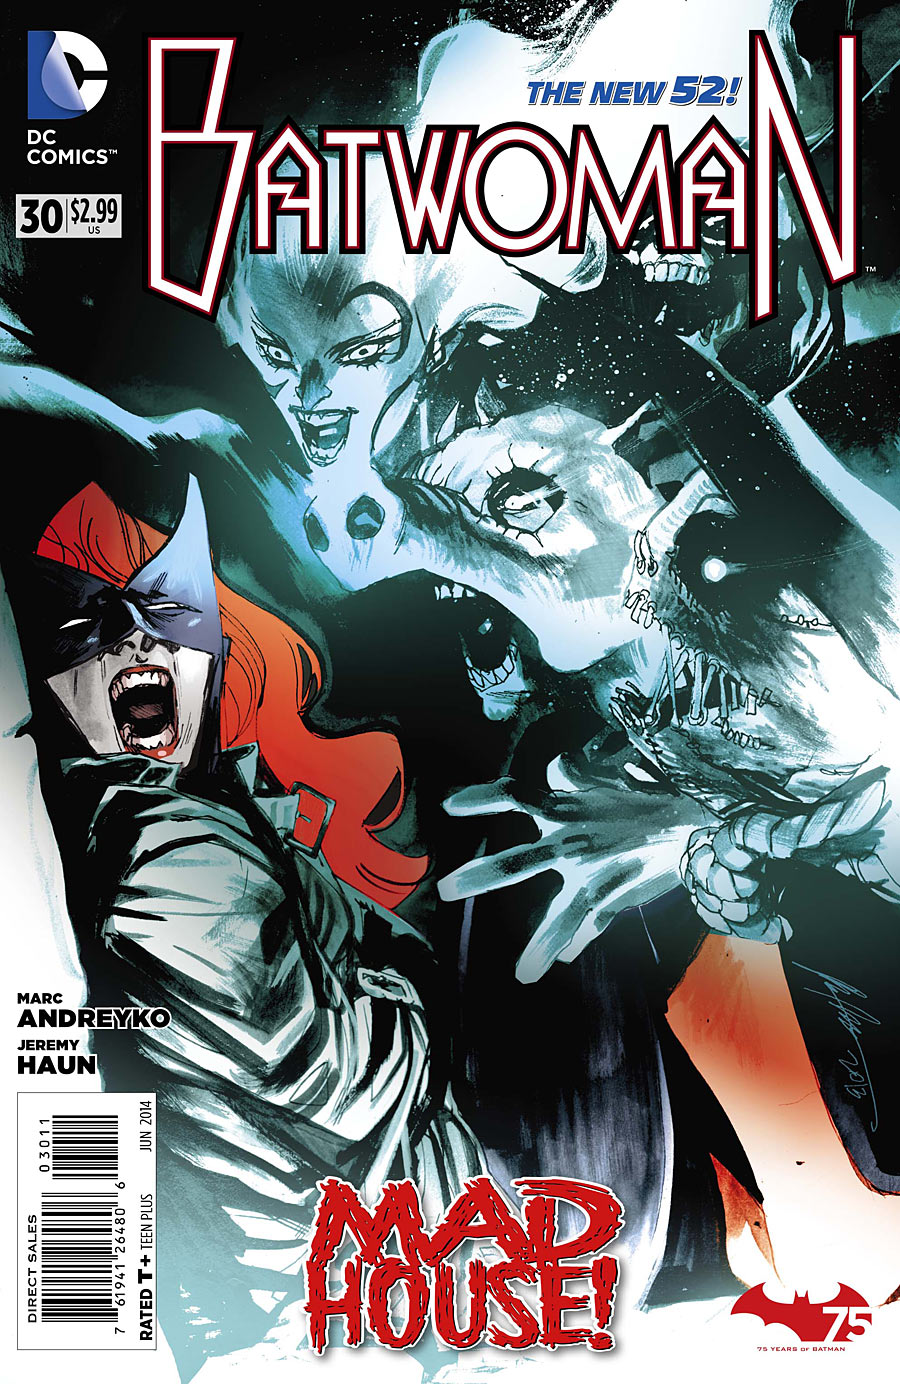 Batwoman (The New 52) #30